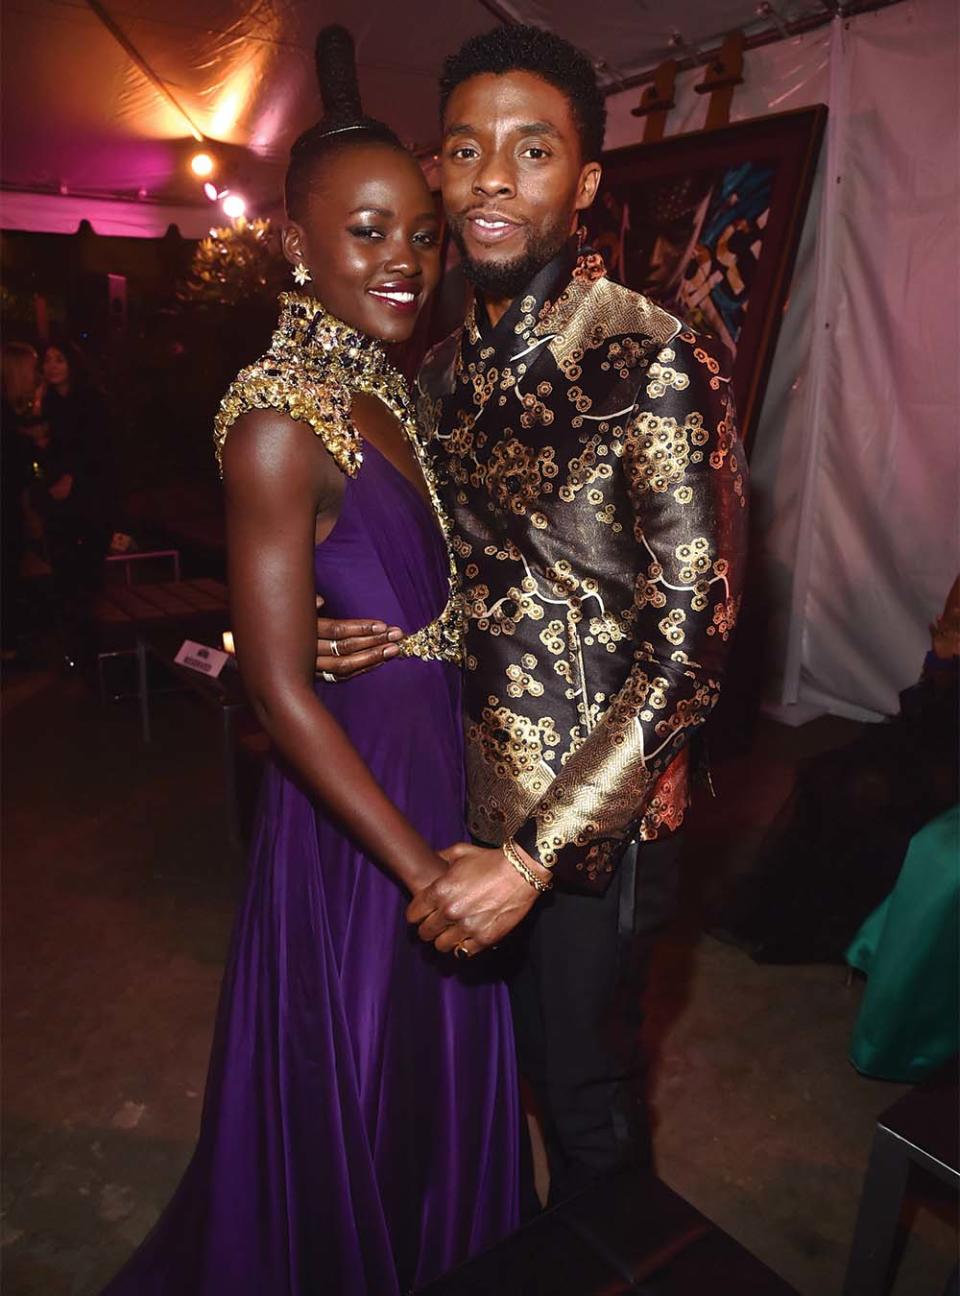 With Chadwick Boseman at the Black Panther premiere in 2018.